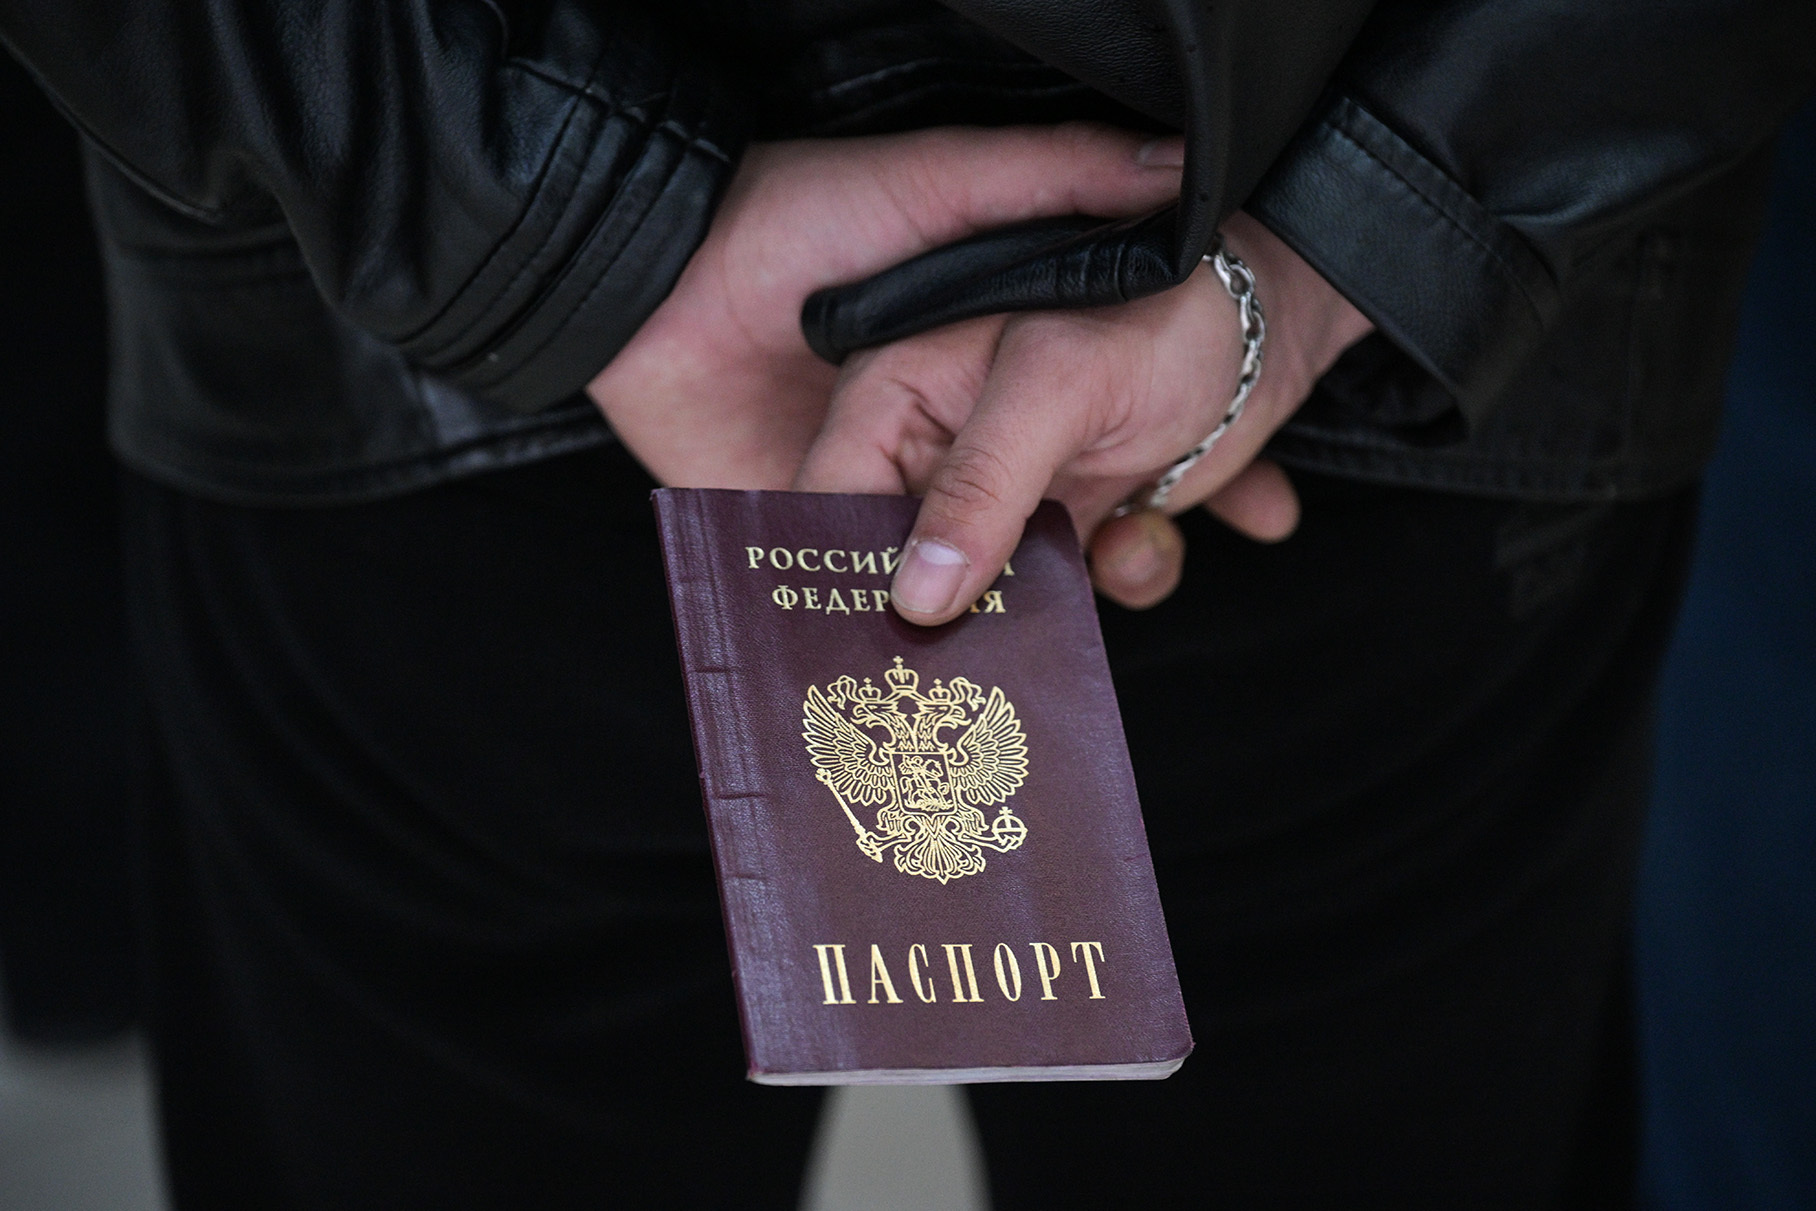 Fraudsters in Russia have begun selling cars using fake passports